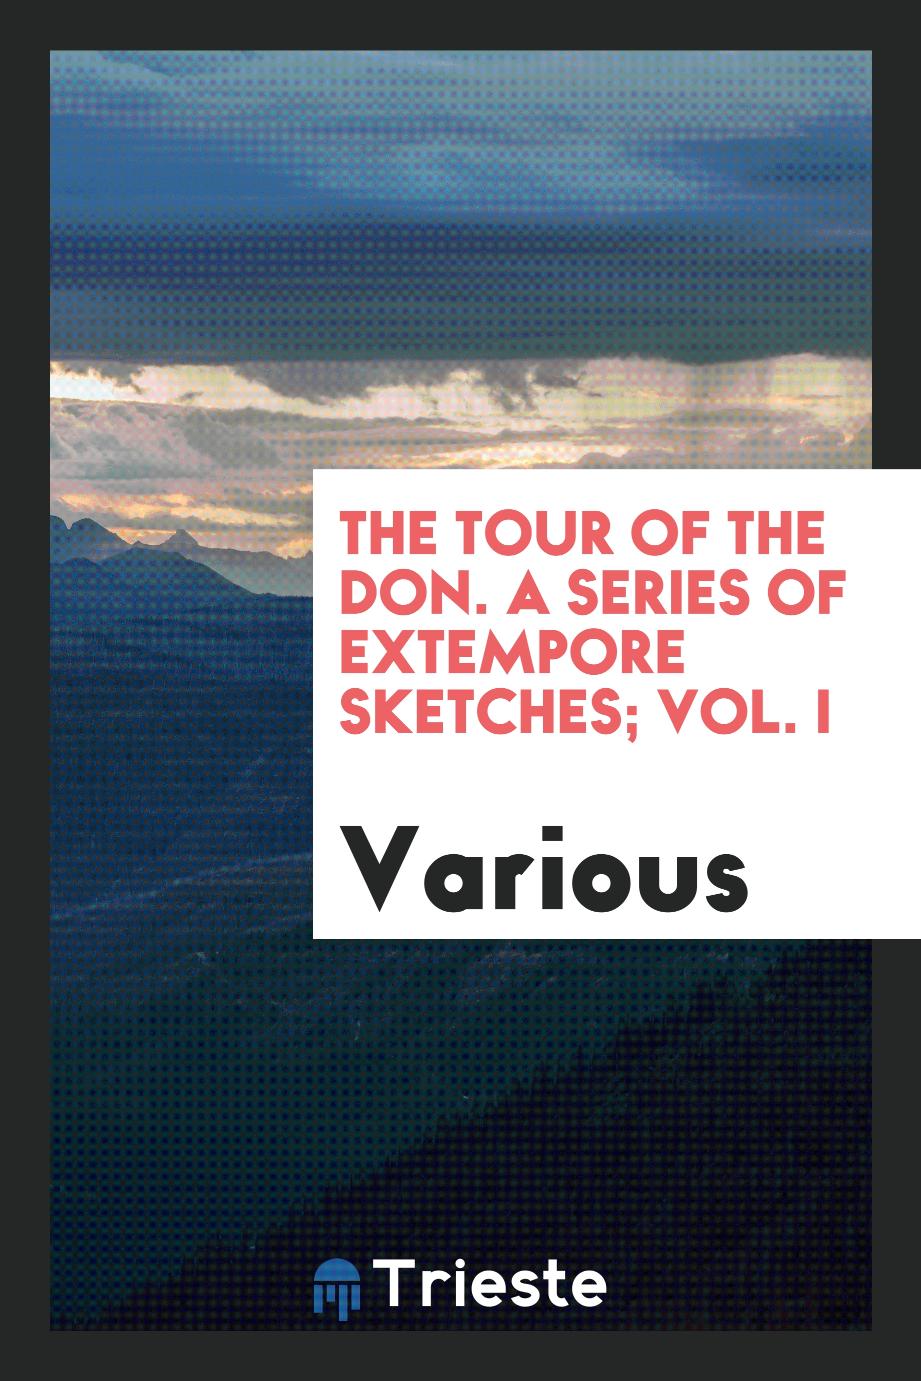 The Tour of the Don. A Series of Extempore Sketches; Vol. I